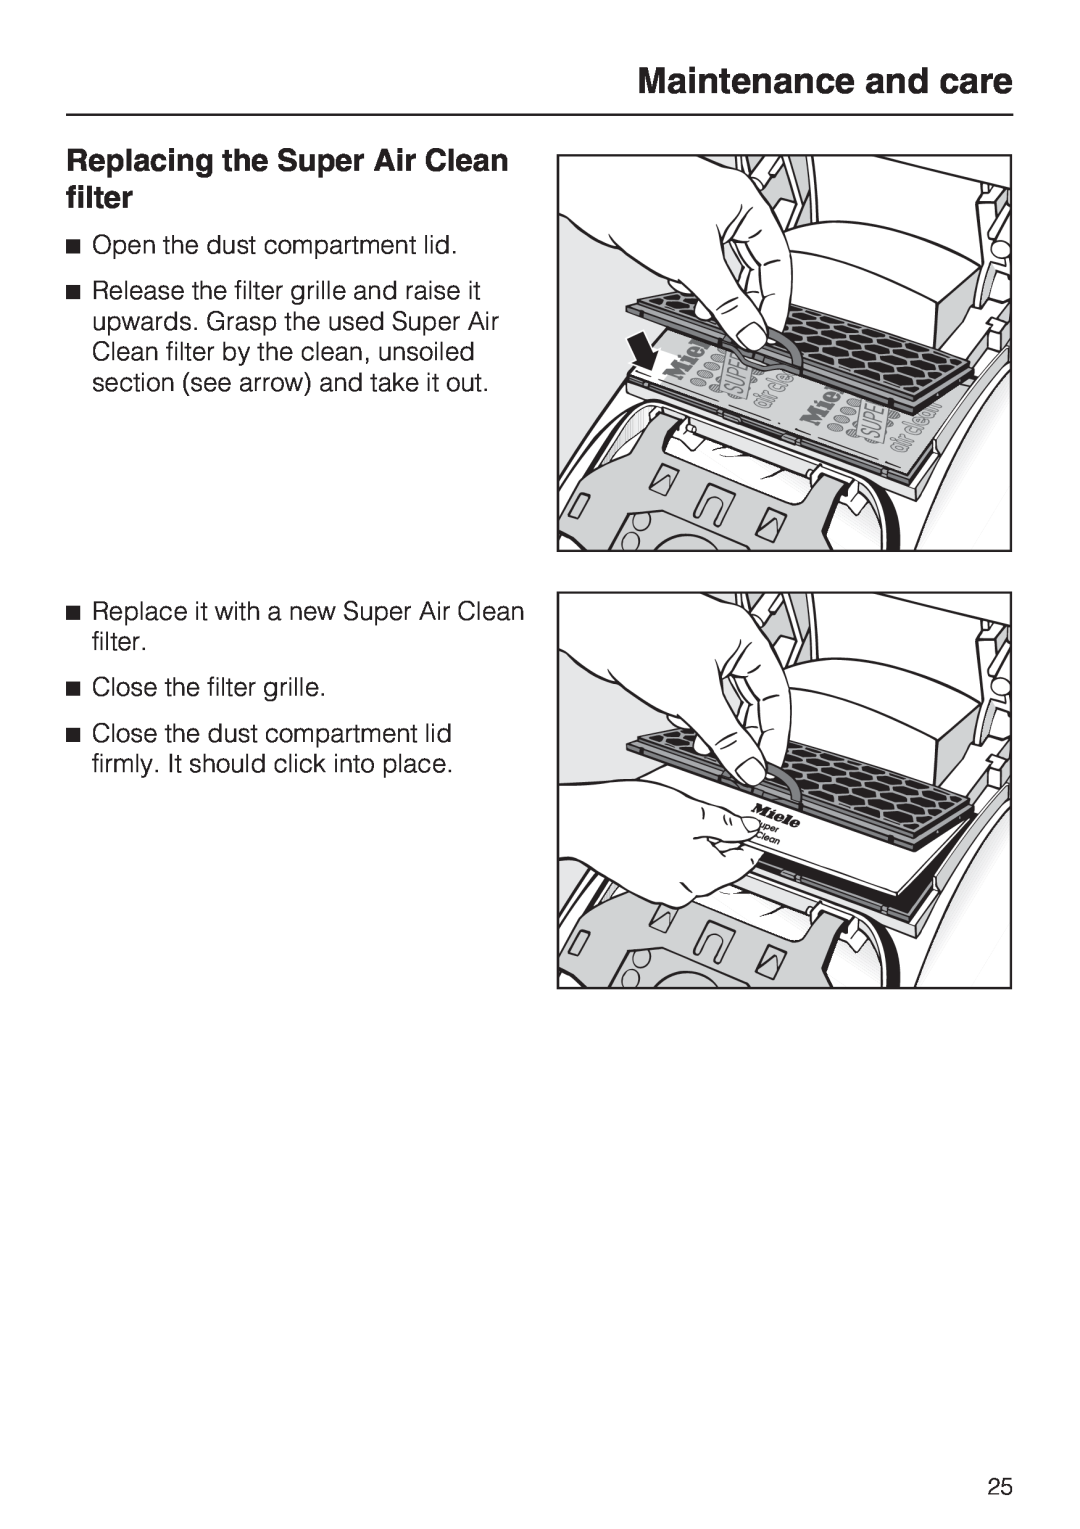 Miele S 4000 Series manual Replacing the Super Air Clean filter, Maintenance and care, Open the dust compartment lid 